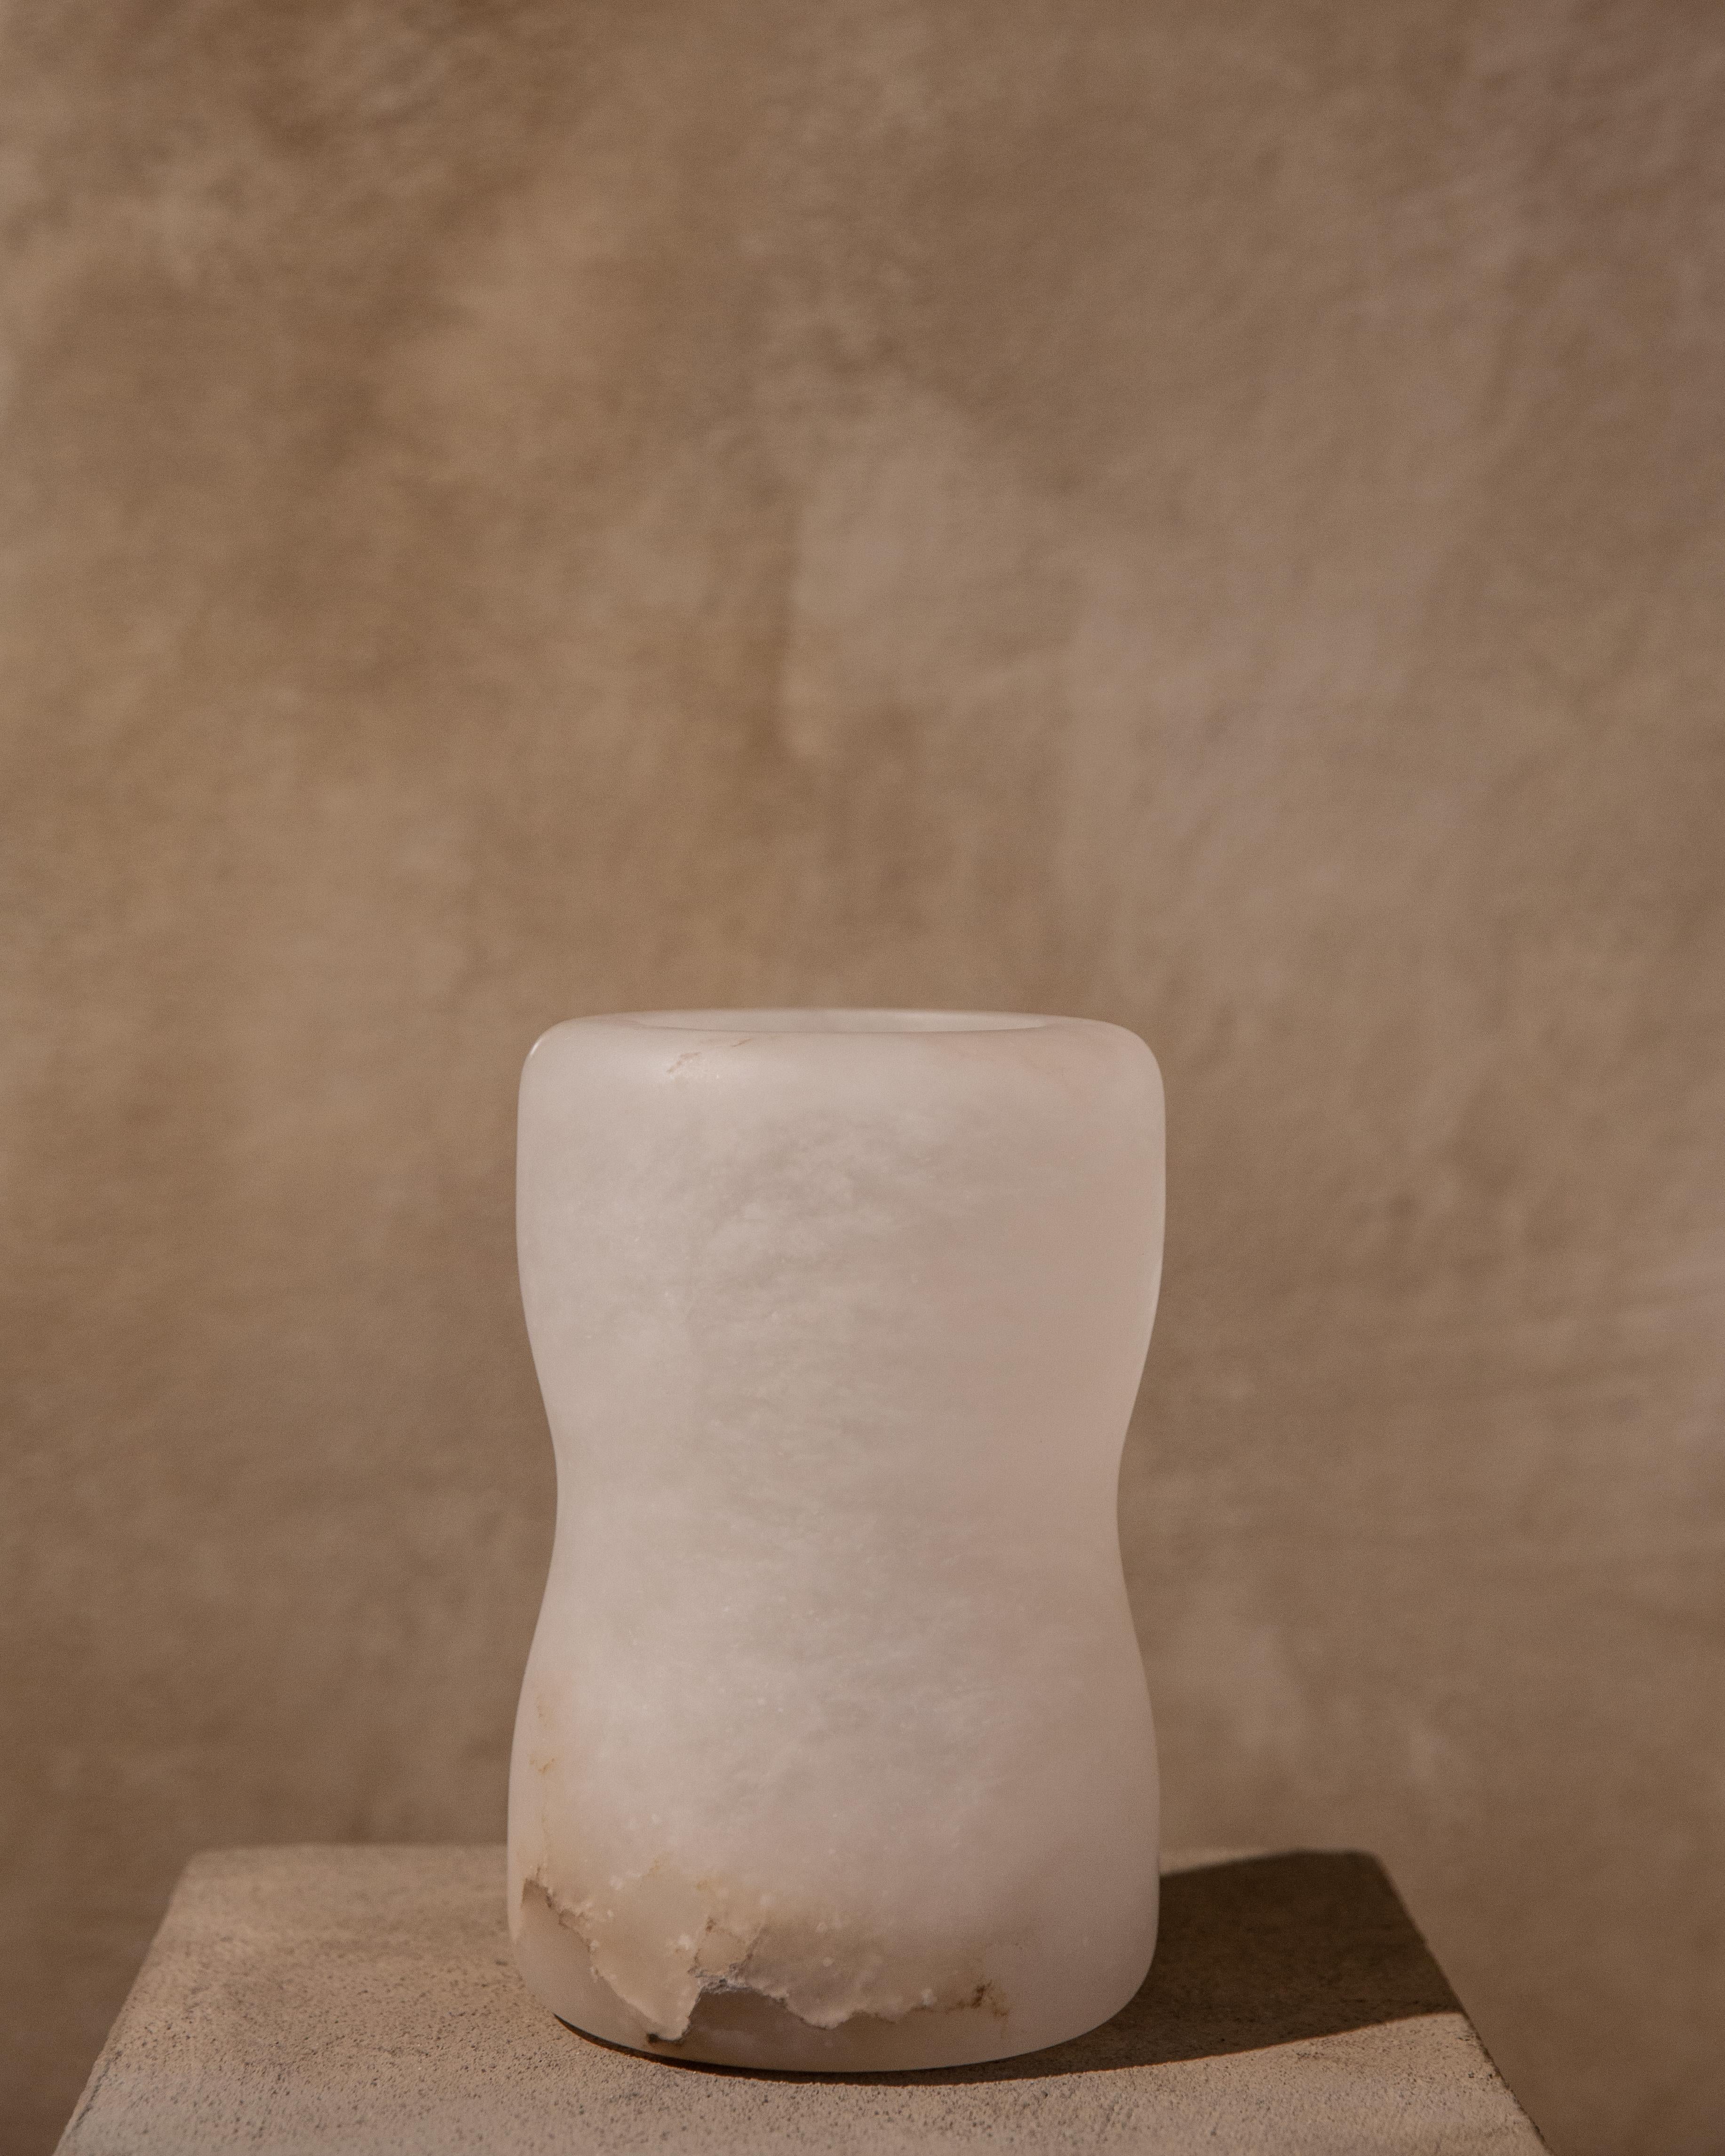 Ala vessel by Karu
Dimensions: D 10 x H 15 cm
Materials: alabaster.

Contemporary vessels inspired by Etruscan Antiquity.
Handcrafted in the hills of Tuscany.

Award-winning design firm Karu debuts its latest limited edition home accessories